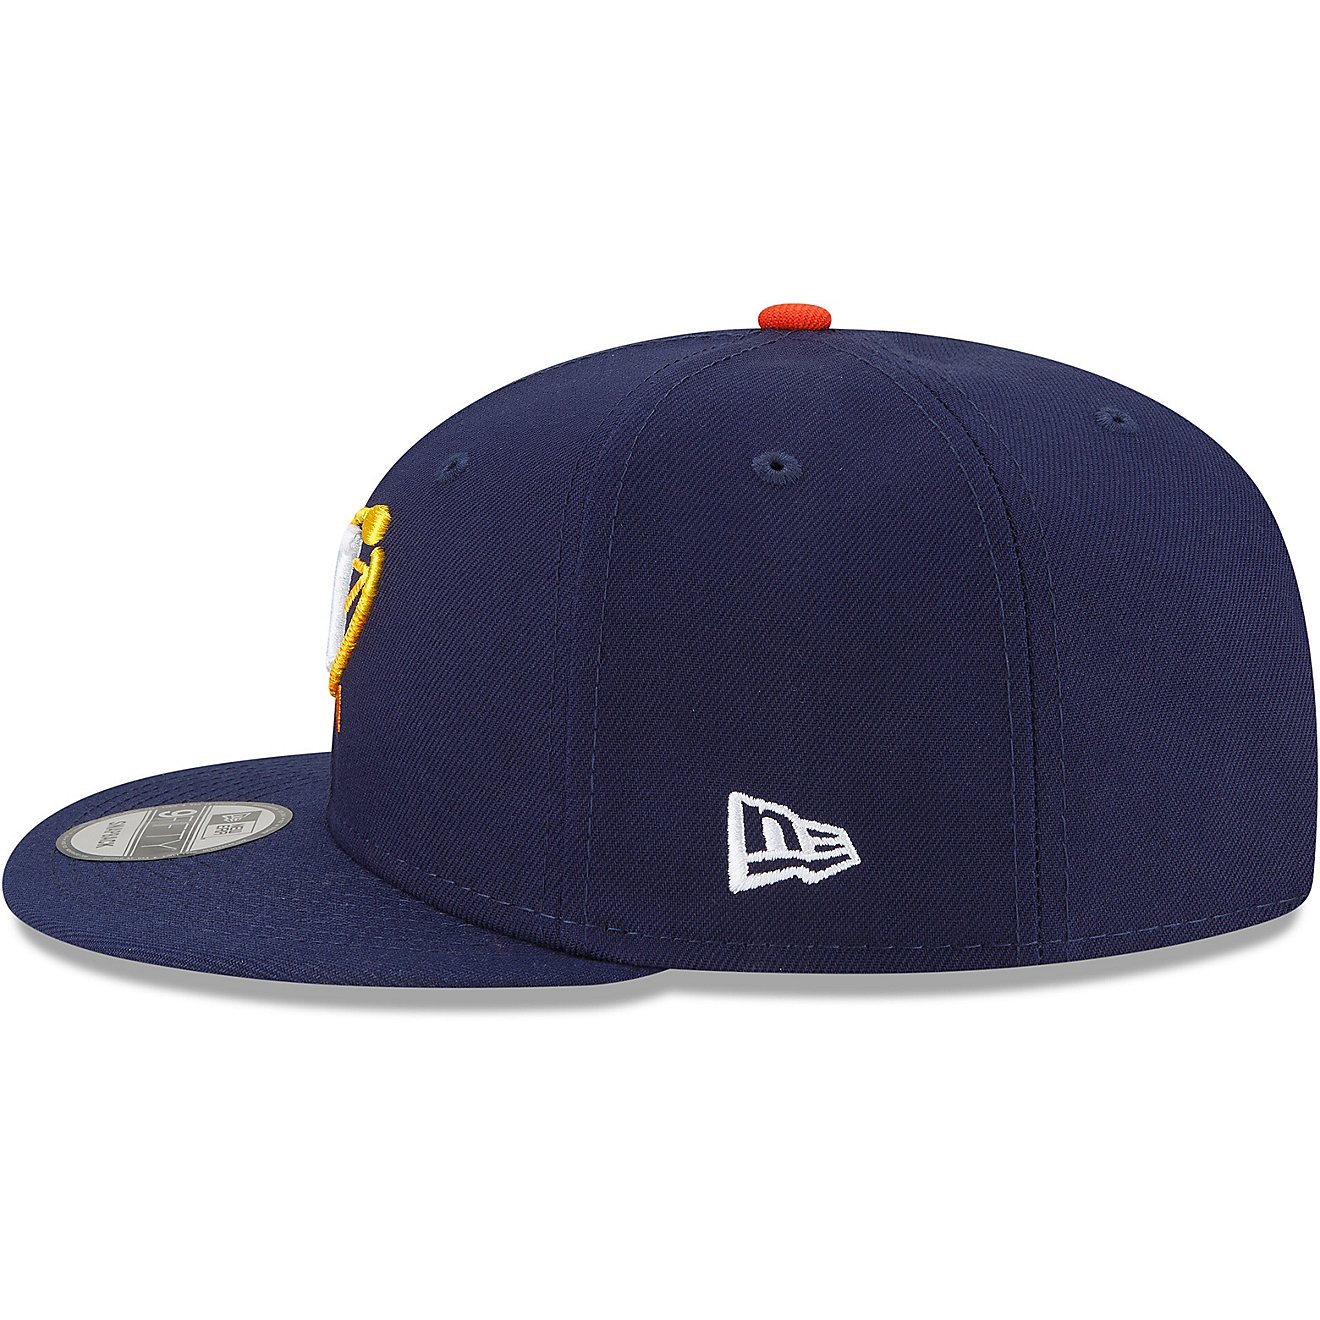 New Era Men's Houston Astros City Connect 9FIFTY Cap                                                                             - view number 5